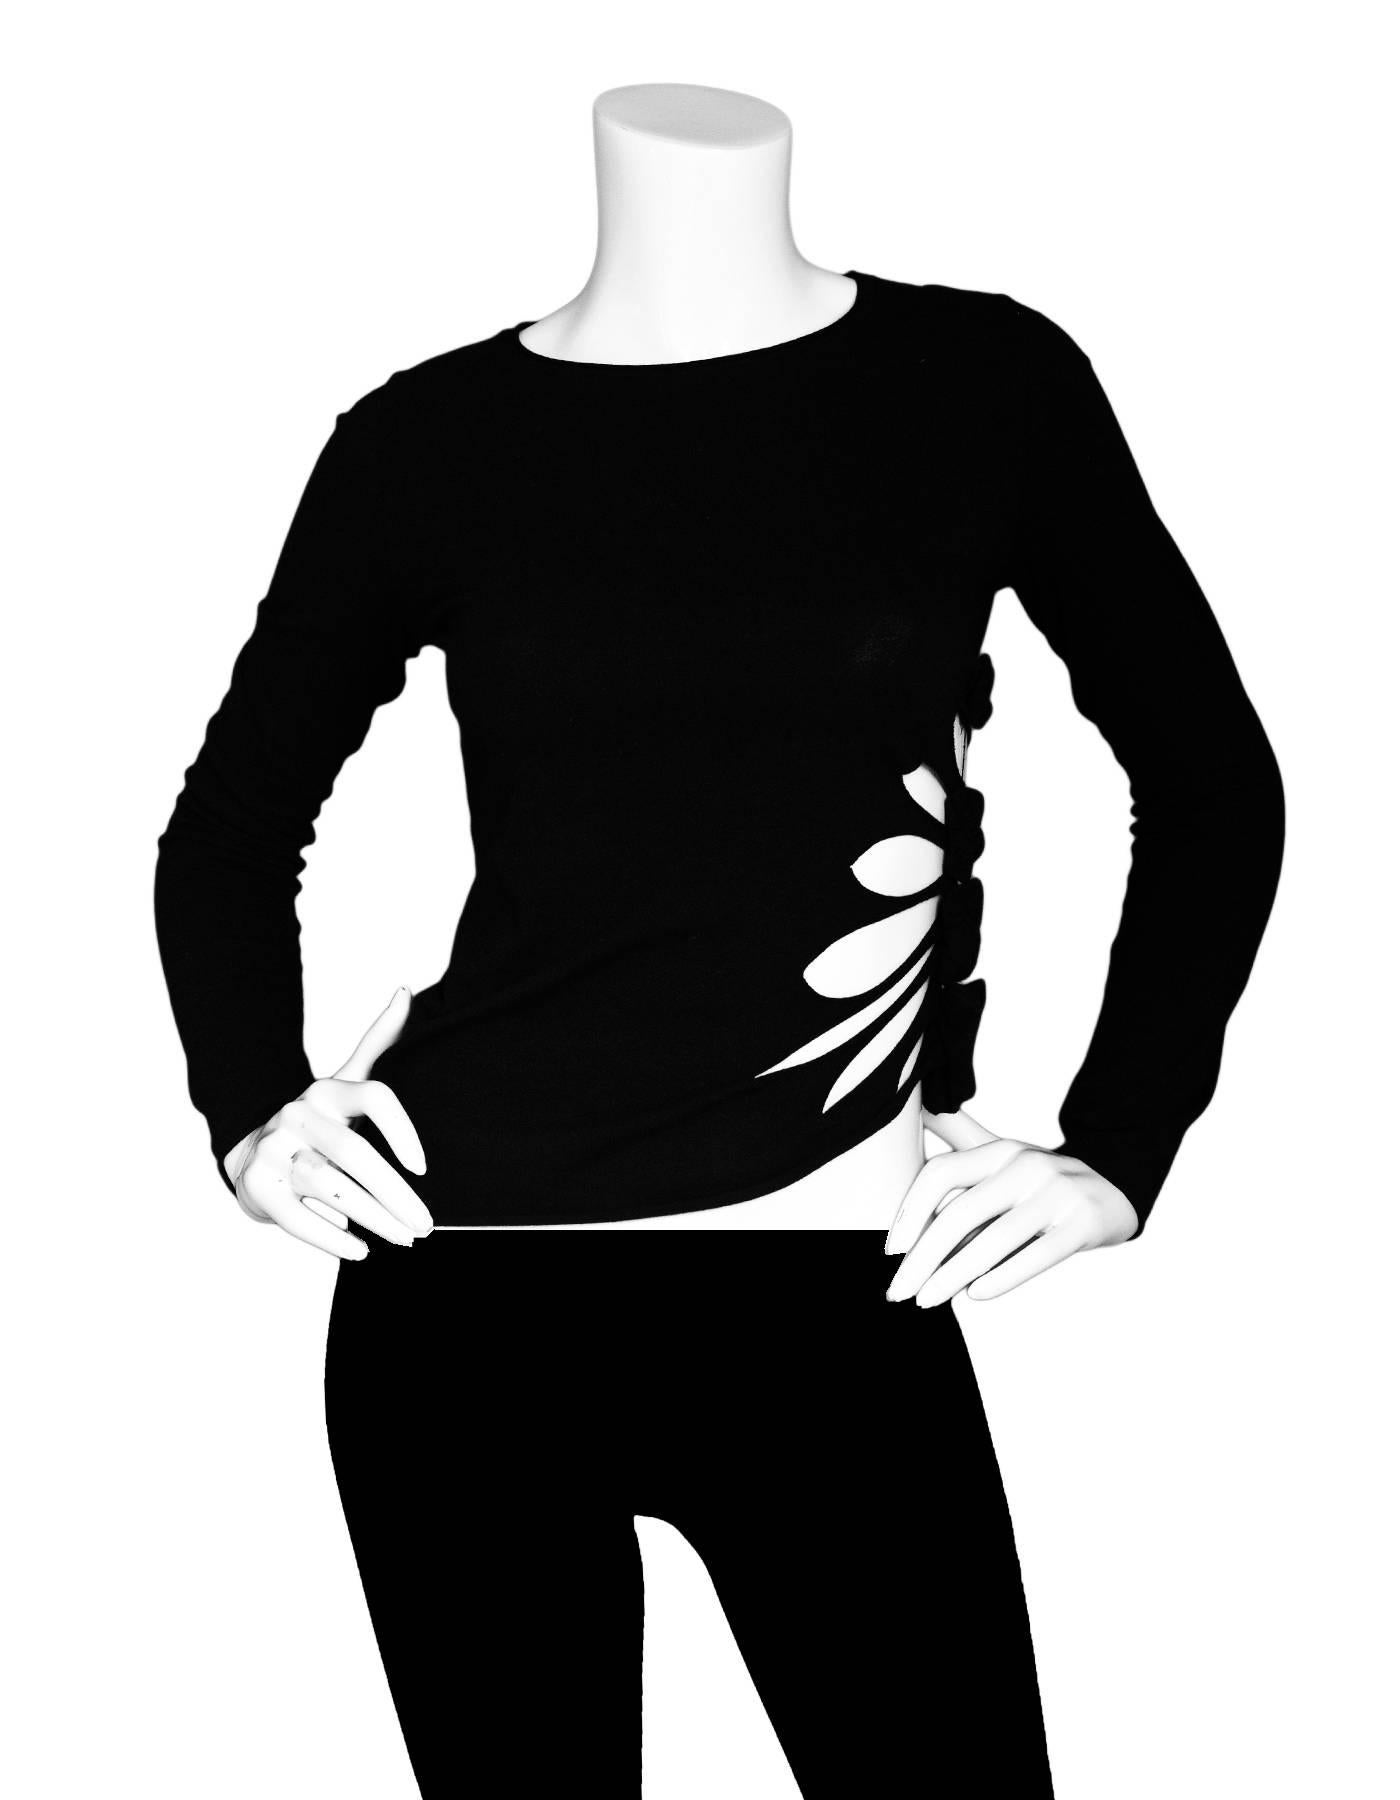 Jean Paul Gaultier Black Cut-Out Top Sz S

Made In: Italy
Color: Black
Composition: 90% cotton, 10% lycra
Lining: None
Closure/Opening: Pull over
Exterior Pockets: None
Interior  Pockets: None
Overall Condition: Excellent pre-owned condition
Marked